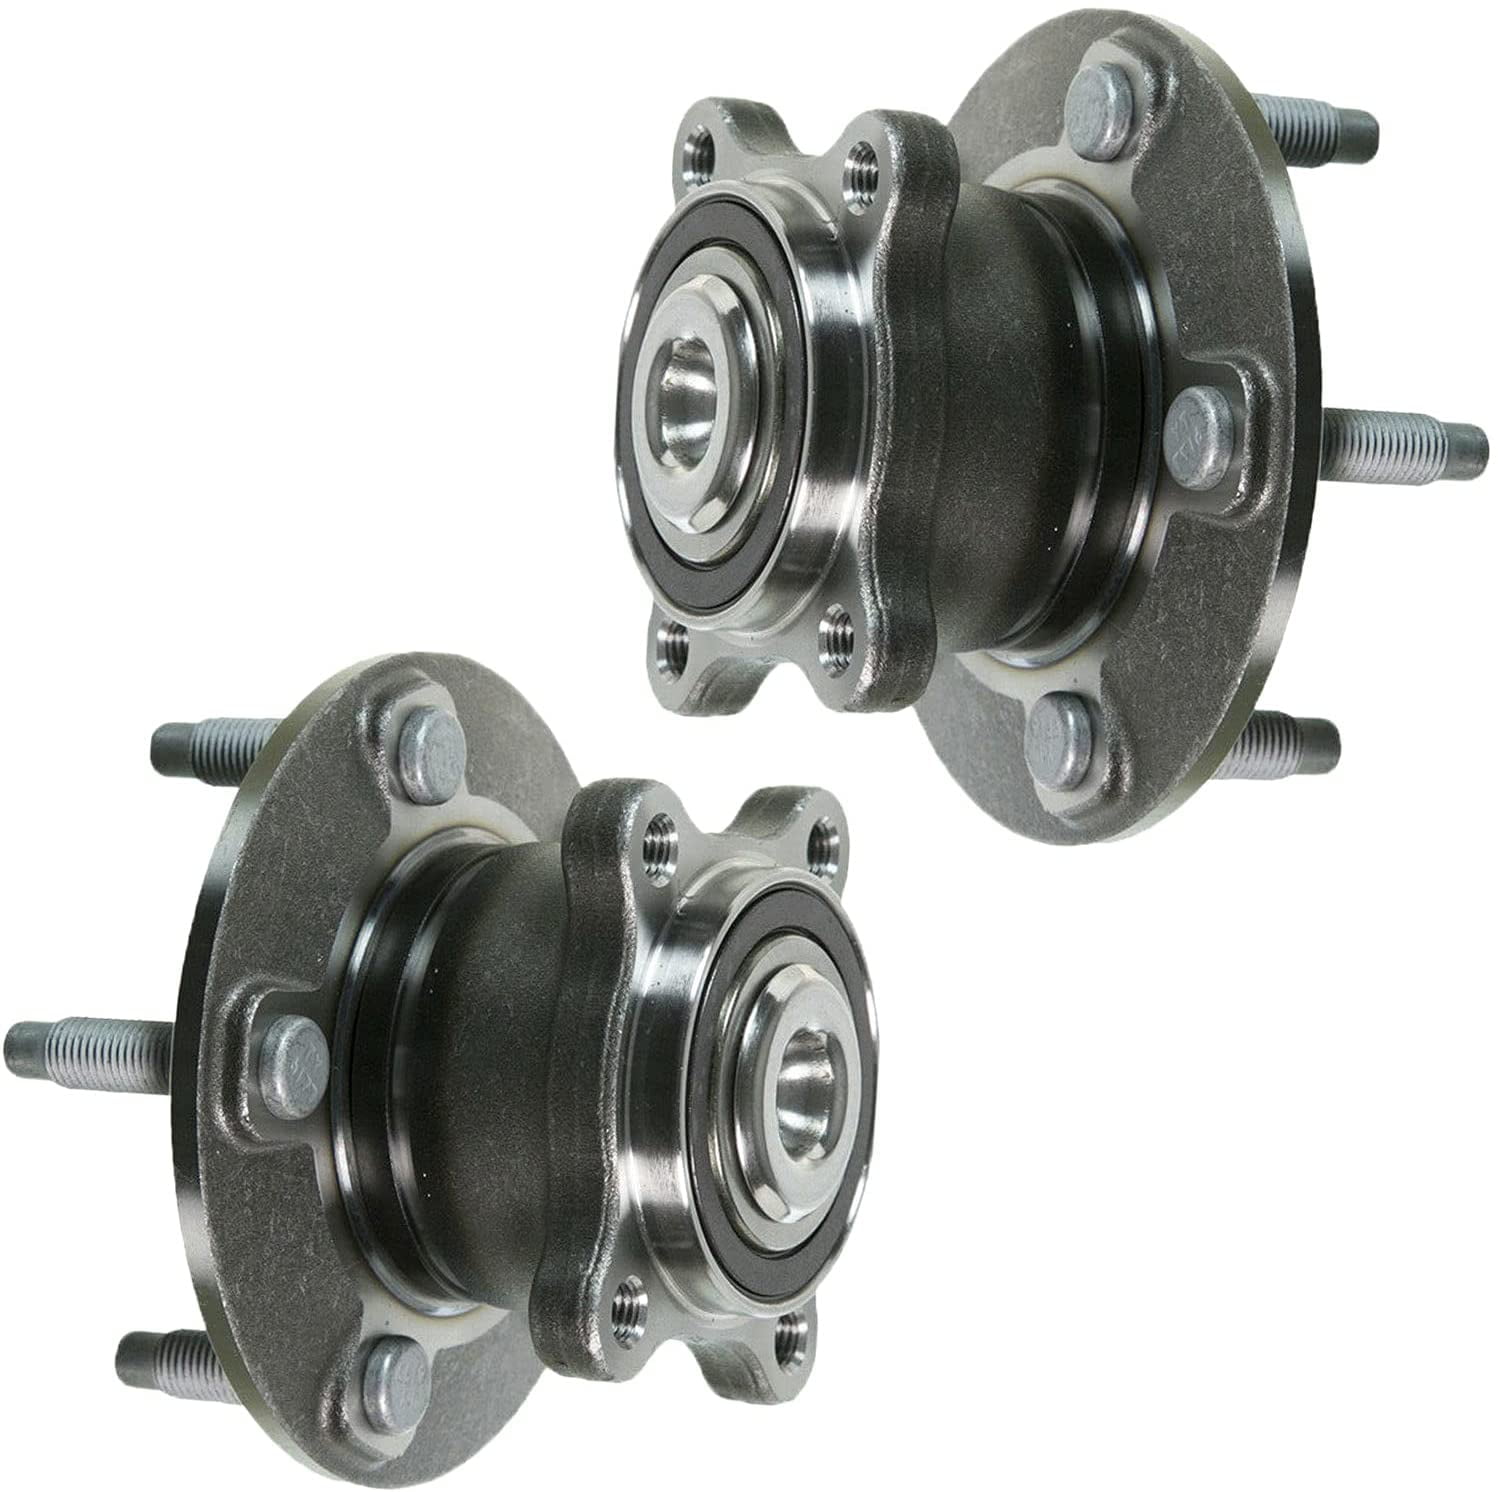 2PCS Rear Wheel Bearing & Hub Assembly For Chevy Sonic Trax Buick Encore FWD